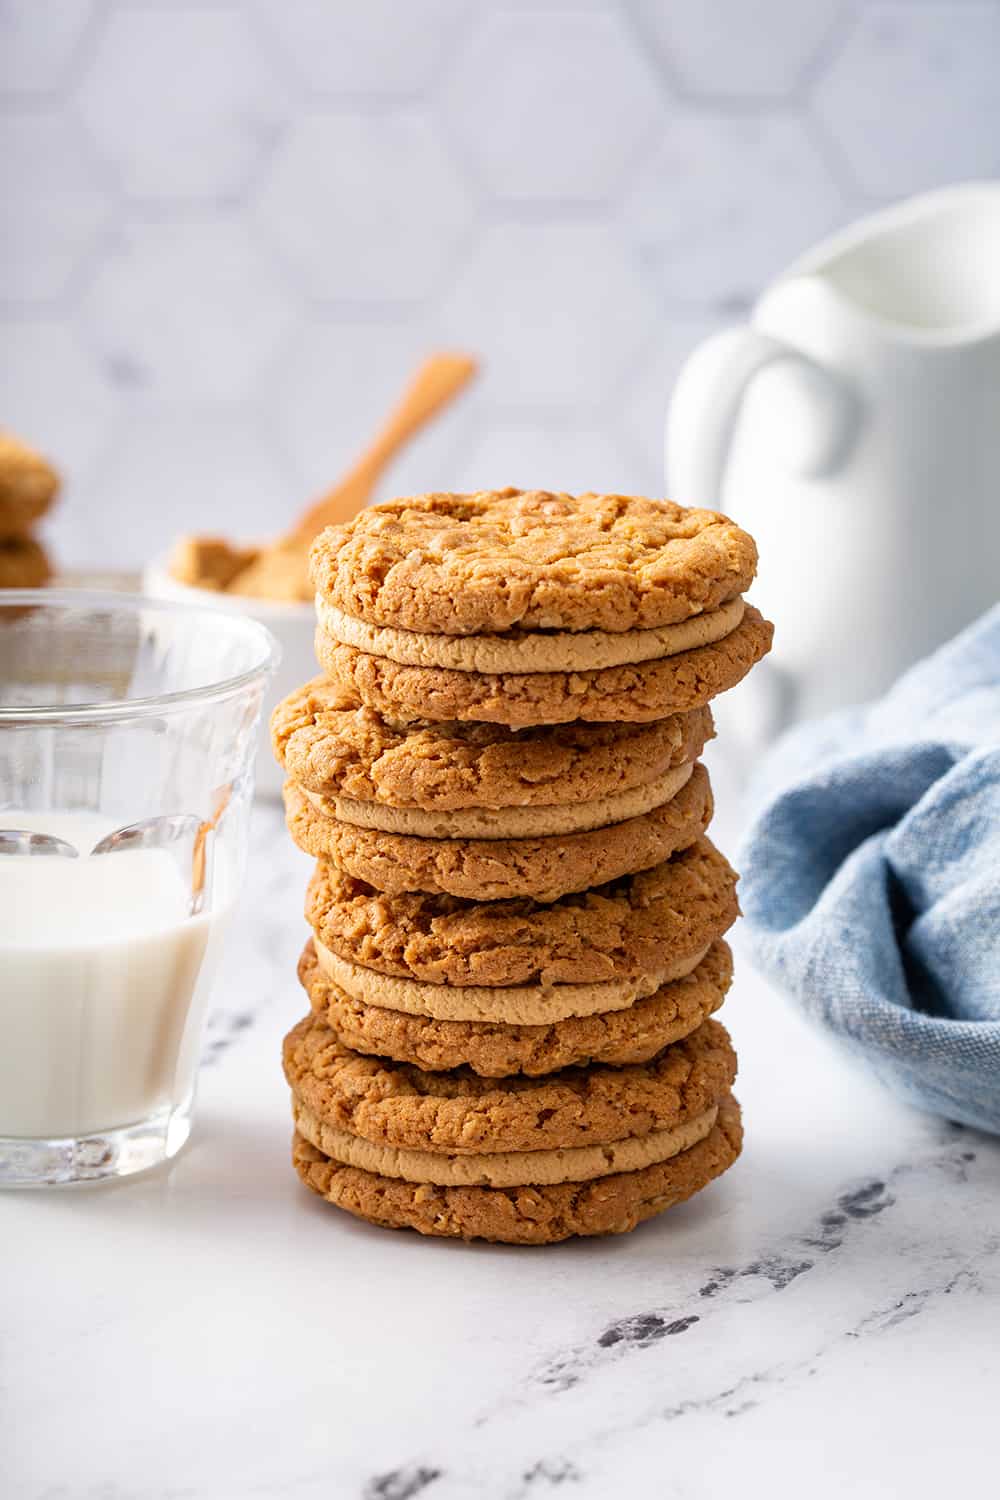 Speculoos Cookie Sandwiches